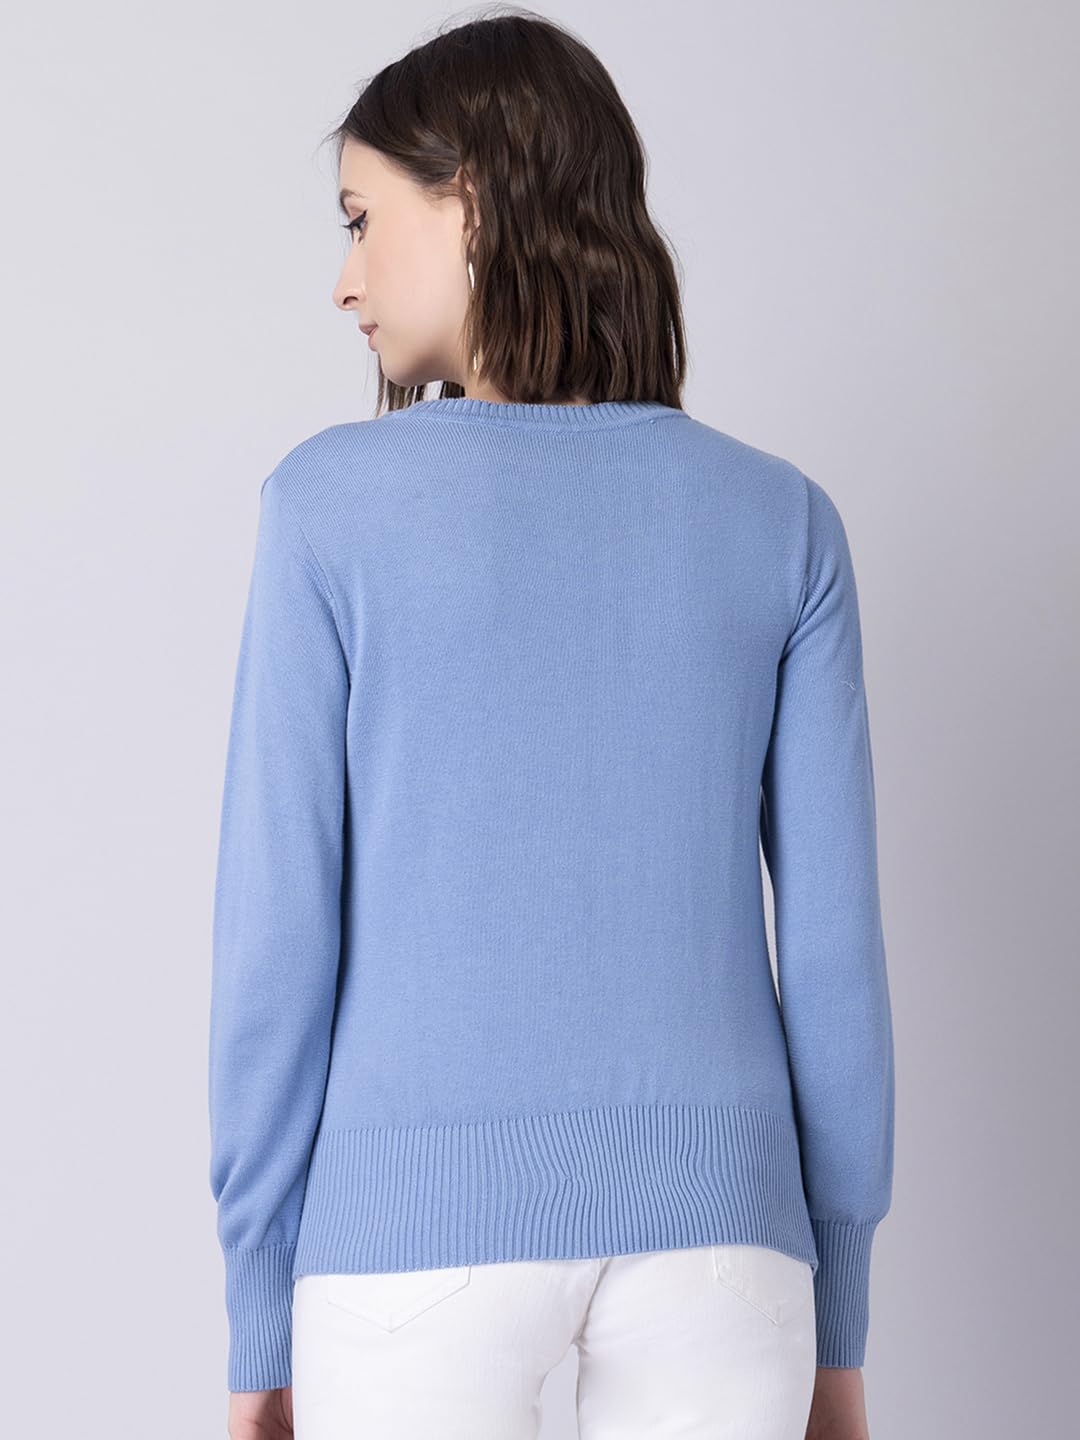 FabAlley Women's Viscose Rayon Round Neck Sweater (SWT00400_Blue_M) 